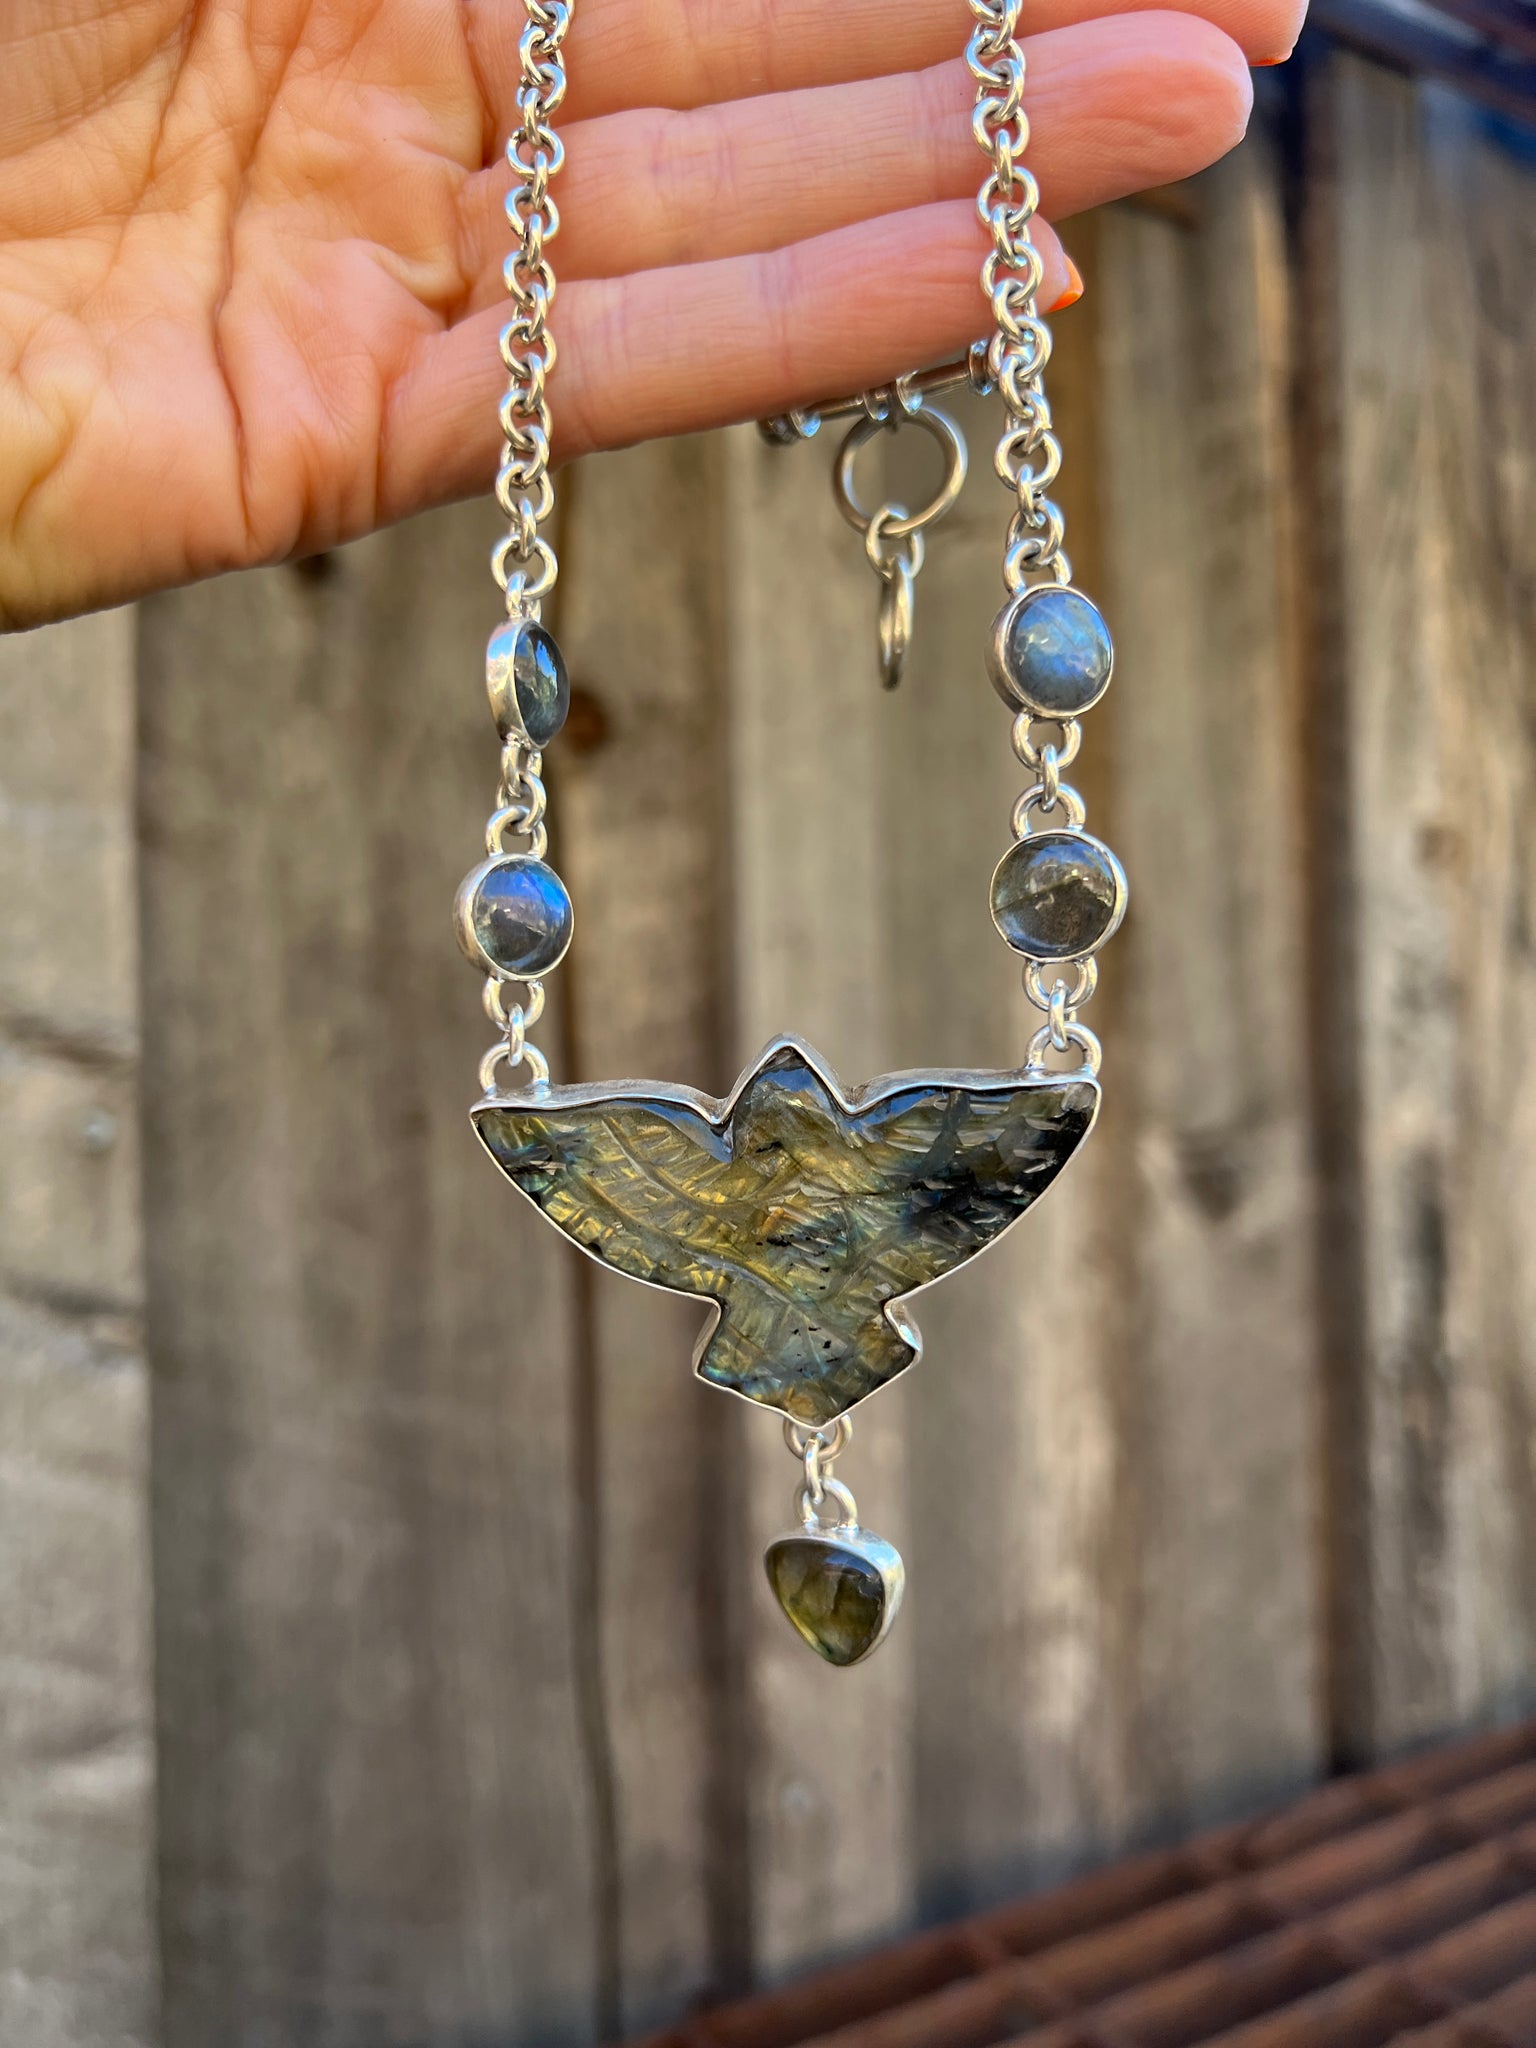 Stunning Labradorite bird necklace set in Sterling Silver with thick chain & toggle clasp T27